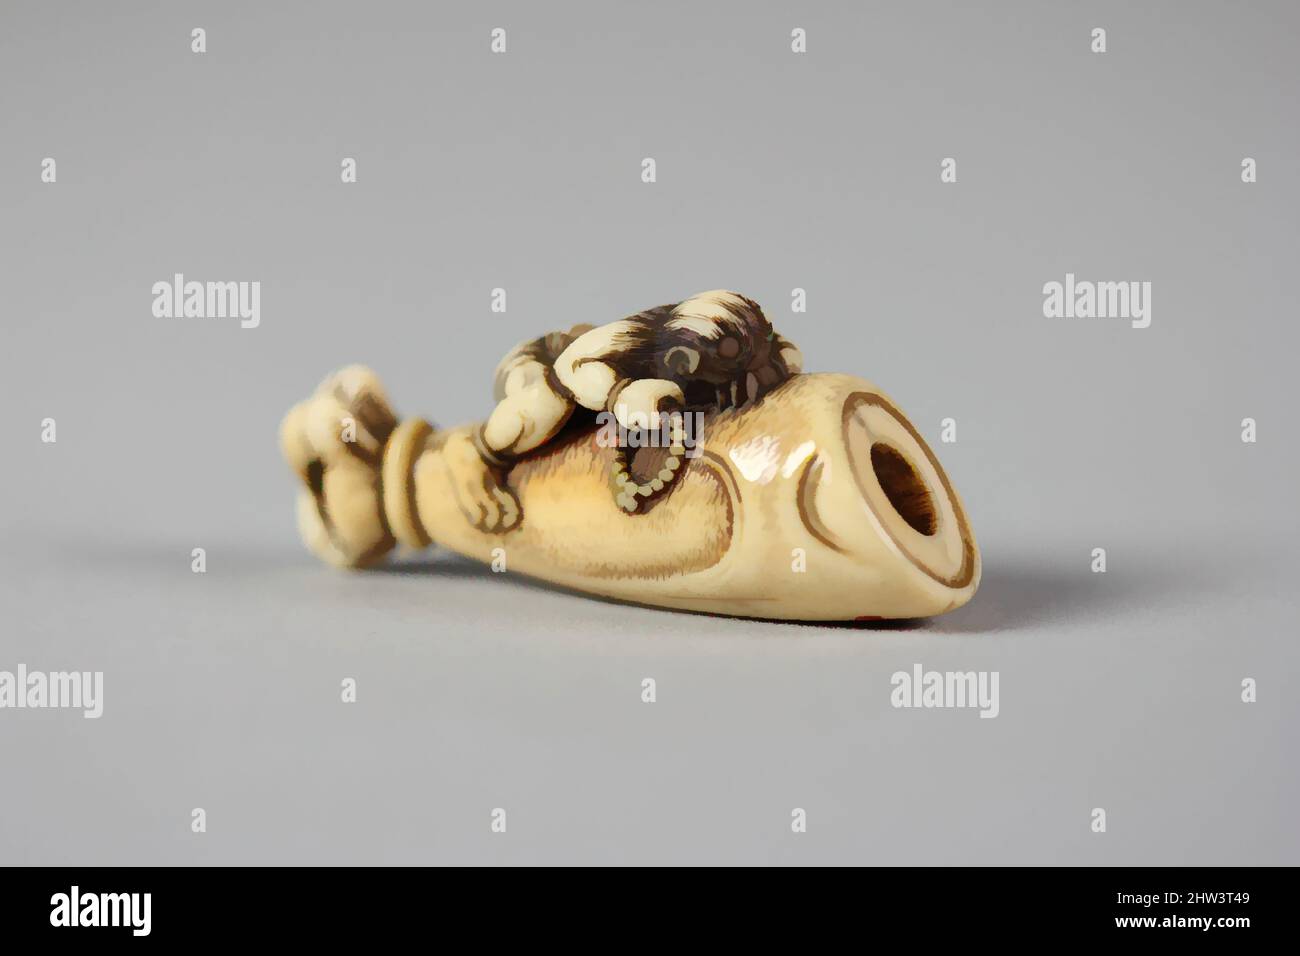 Art inspired by Netsuke of Hand and Forearm of a Demon with Small Demon on the Side, 19th century, Japan, Ivory, H. 2 1/4 in. (5.7 cm), Netsuke, Classic works modernized by Artotop with a splash of modernity. Shapes, color and value, eye-catching visual impact on art. Emotions through freedom of artworks in a contemporary way. A timeless message pursuing a wildly creative new direction. Artists turning to the digital medium and creating the Artotop NFT Stock Photo